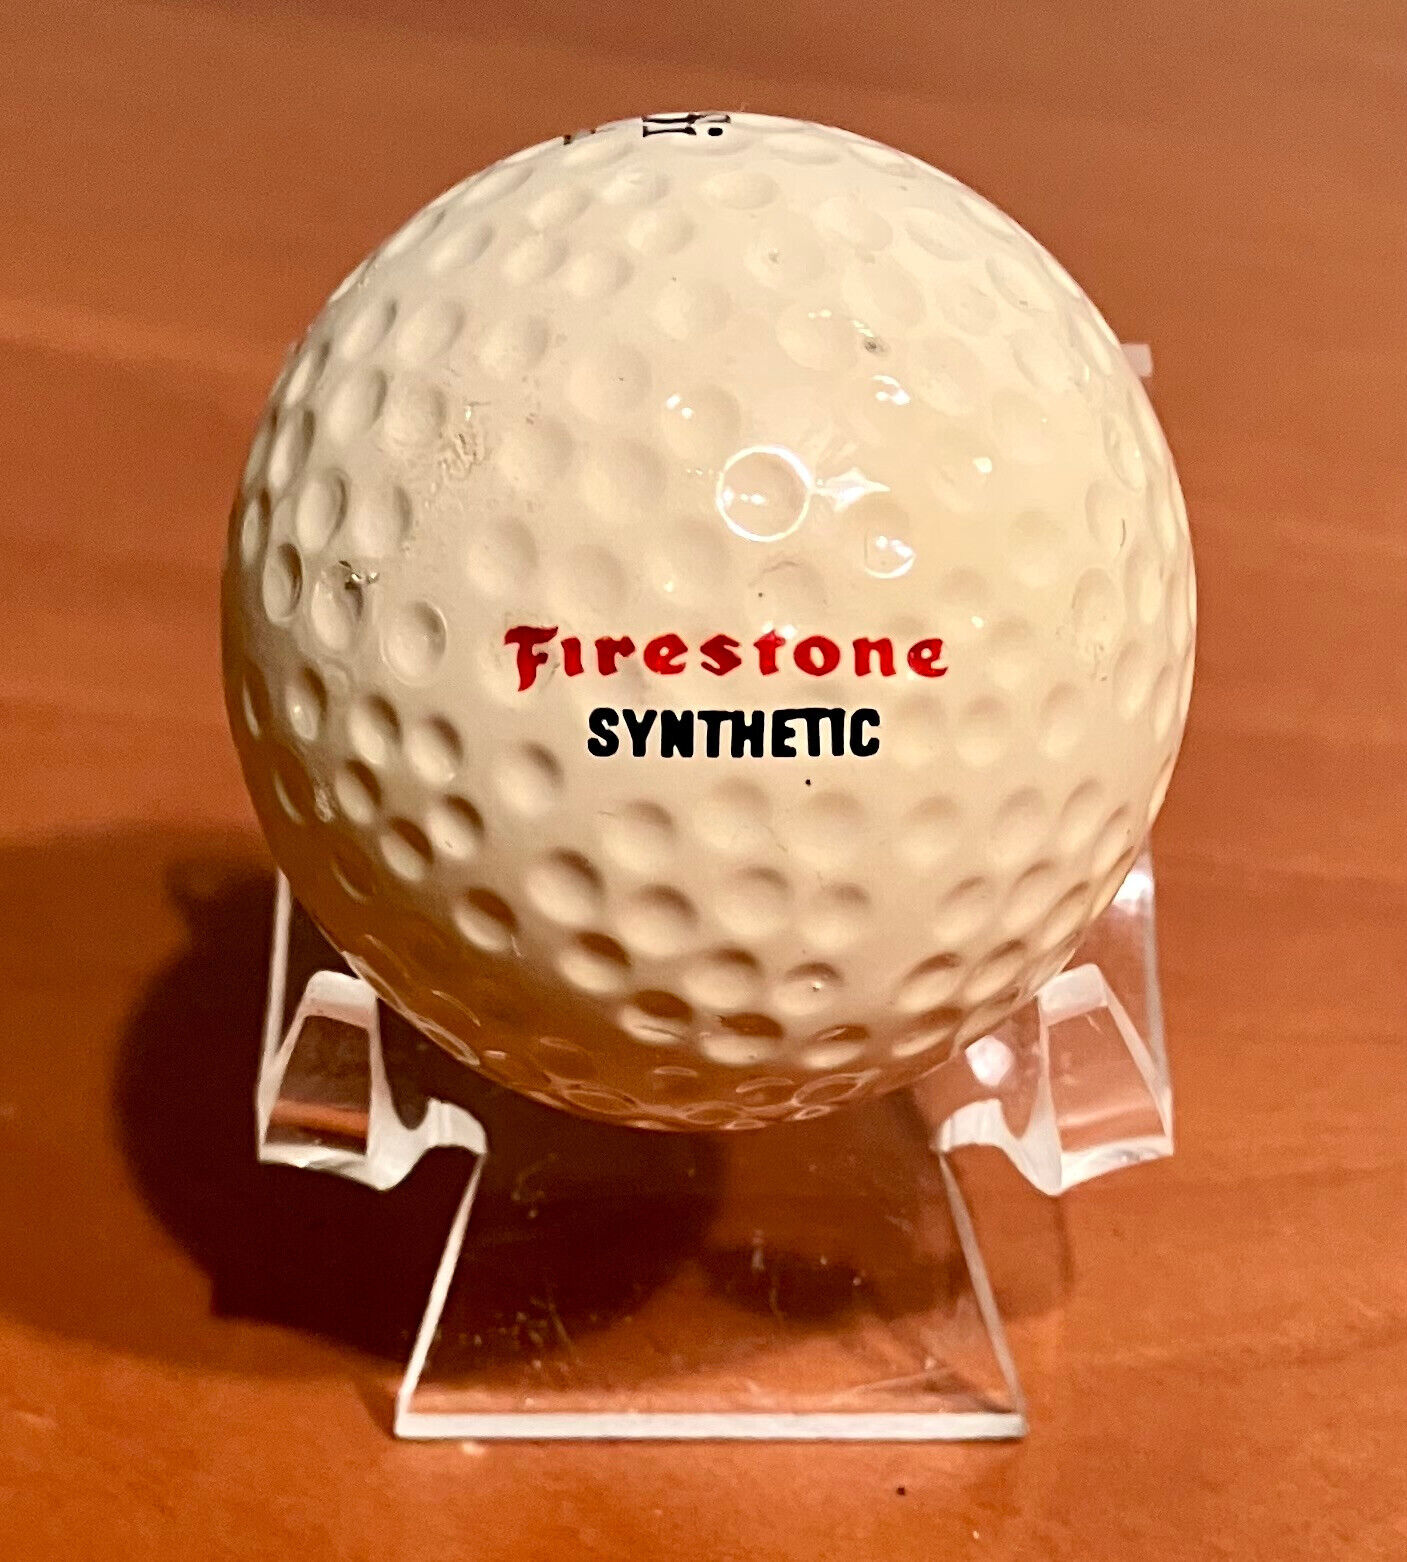 Vintage Firestone Synthetic Rubber Auto Tires Advertising Logo Golf Ball